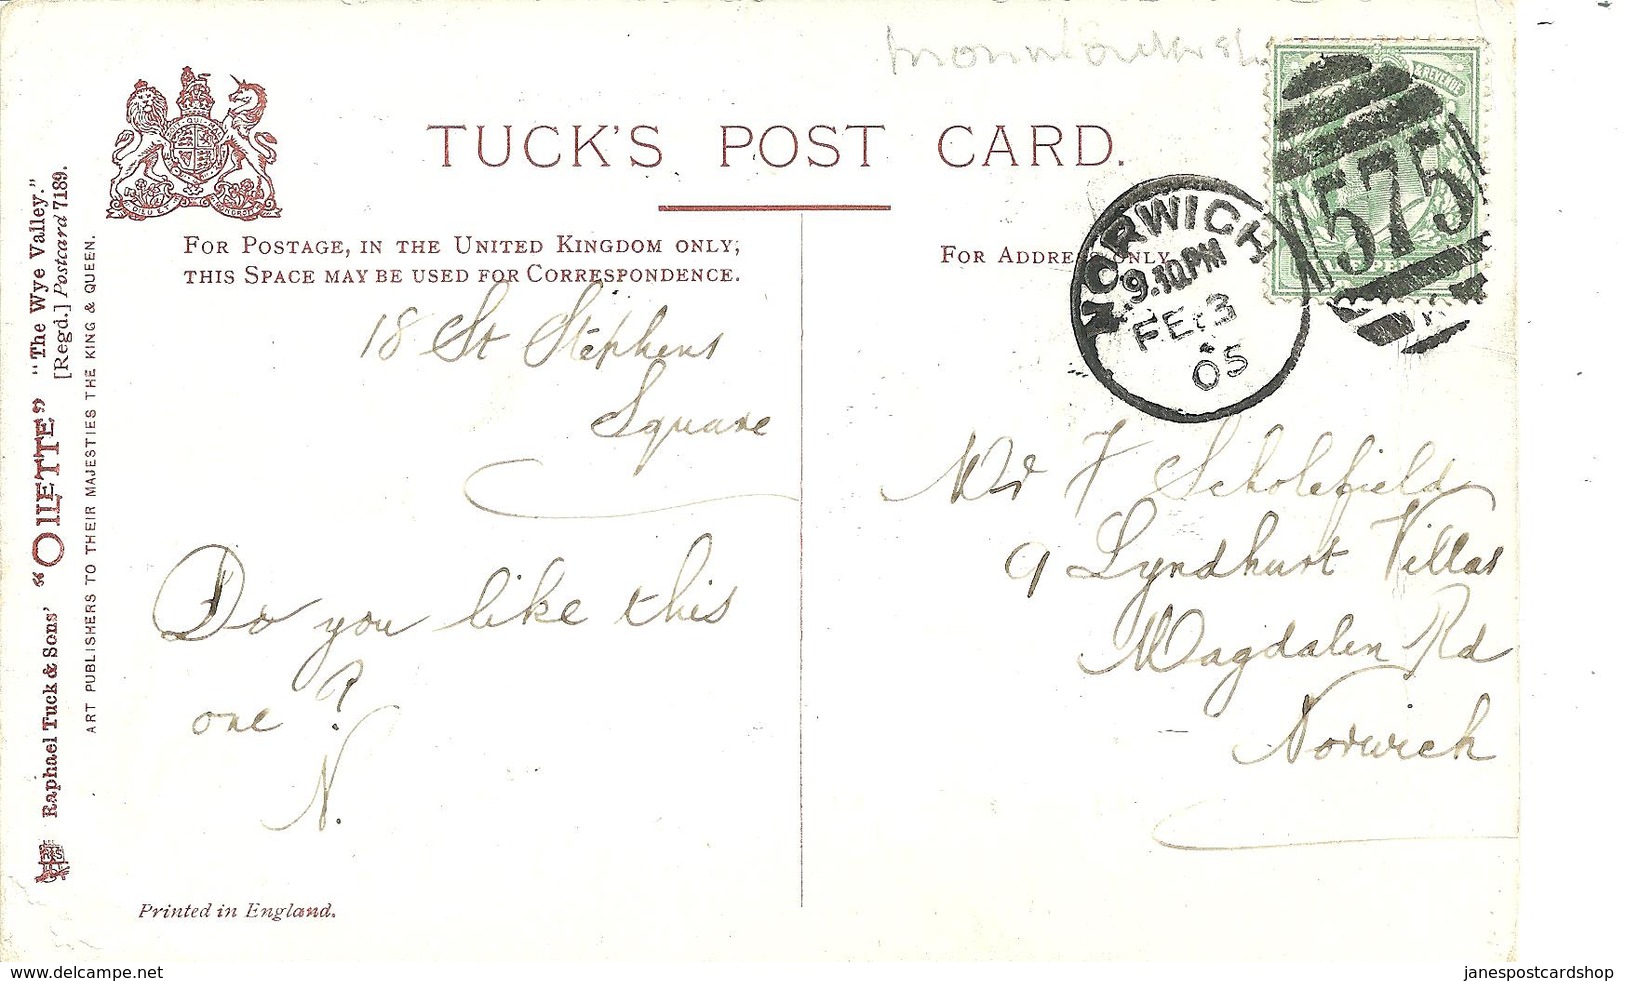 CHEPSTOW CASTLE TUCKS OILETTE - THE WYE VALLEY WITH NORWICH DUPLEX POSTMARK - Monmouthshire